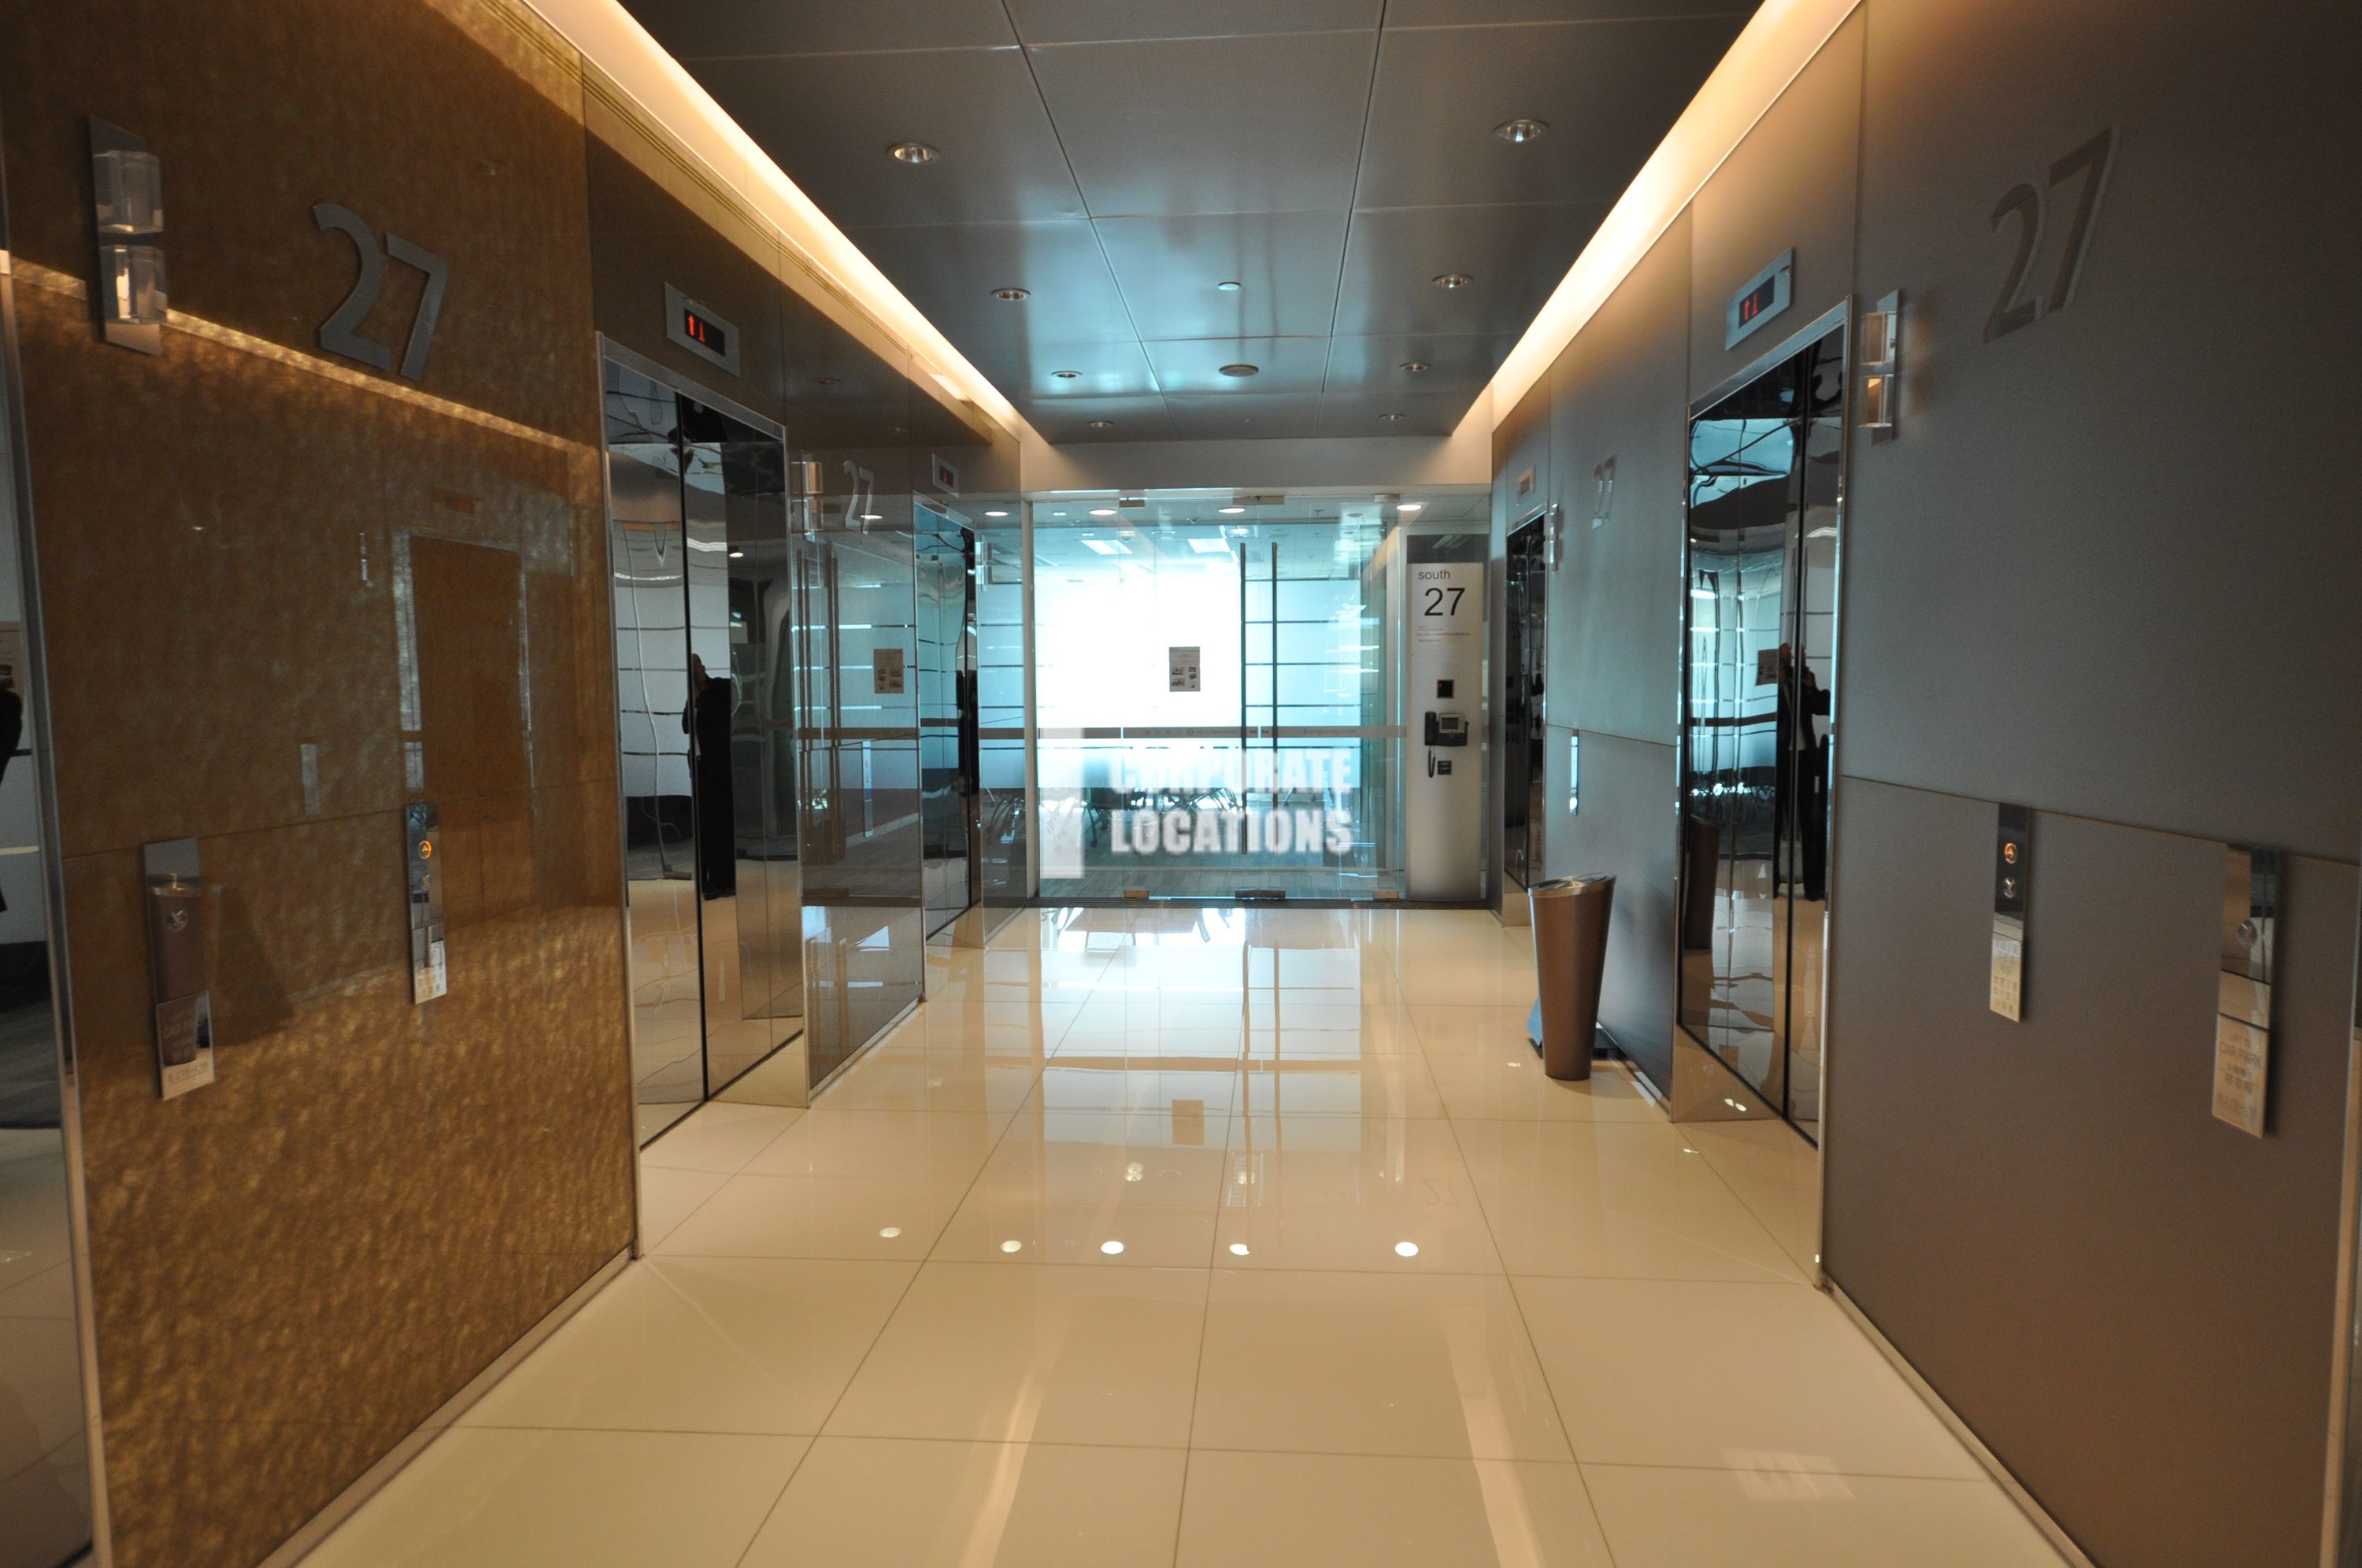 Lease offices in Enterprise Square Five Tower 2 - Kowloon Bay / Kwun Tong